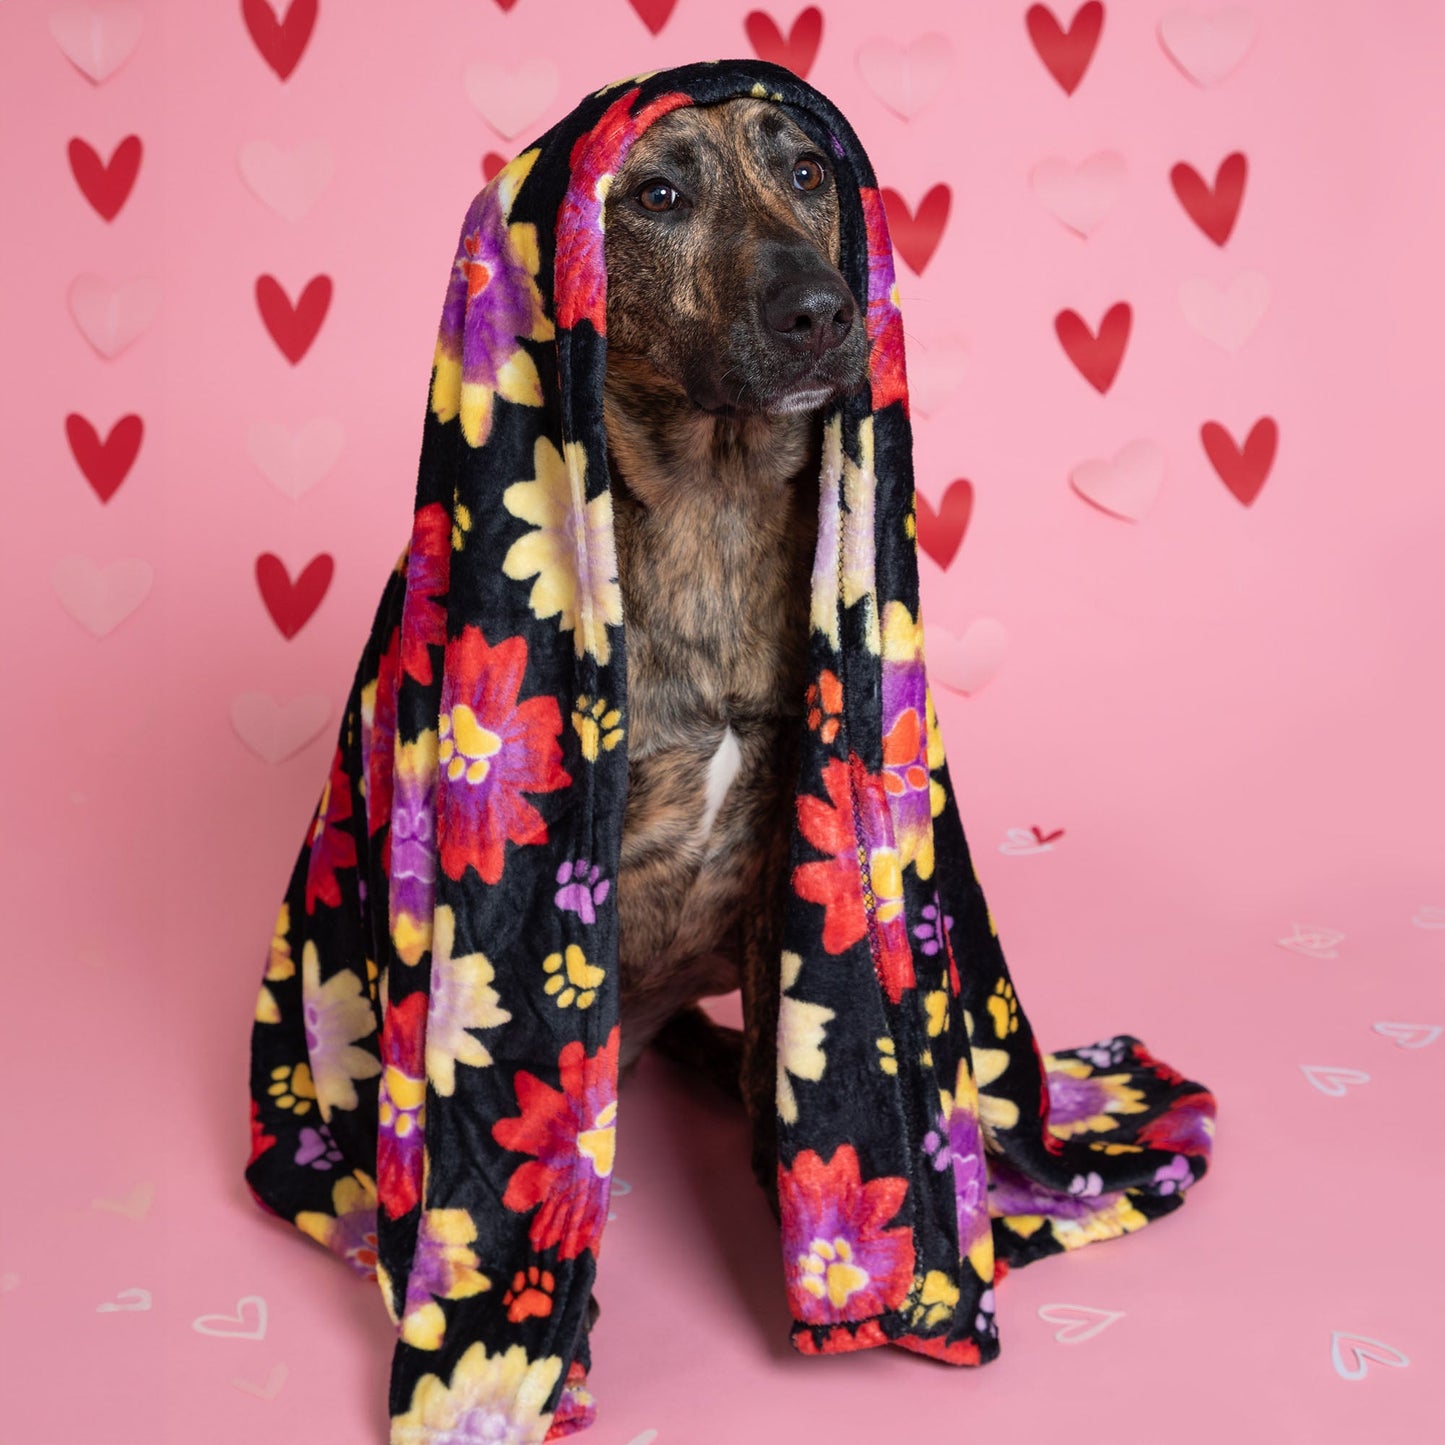 6th Annual Send a Valentine & Love To a Shelter Fur Baby